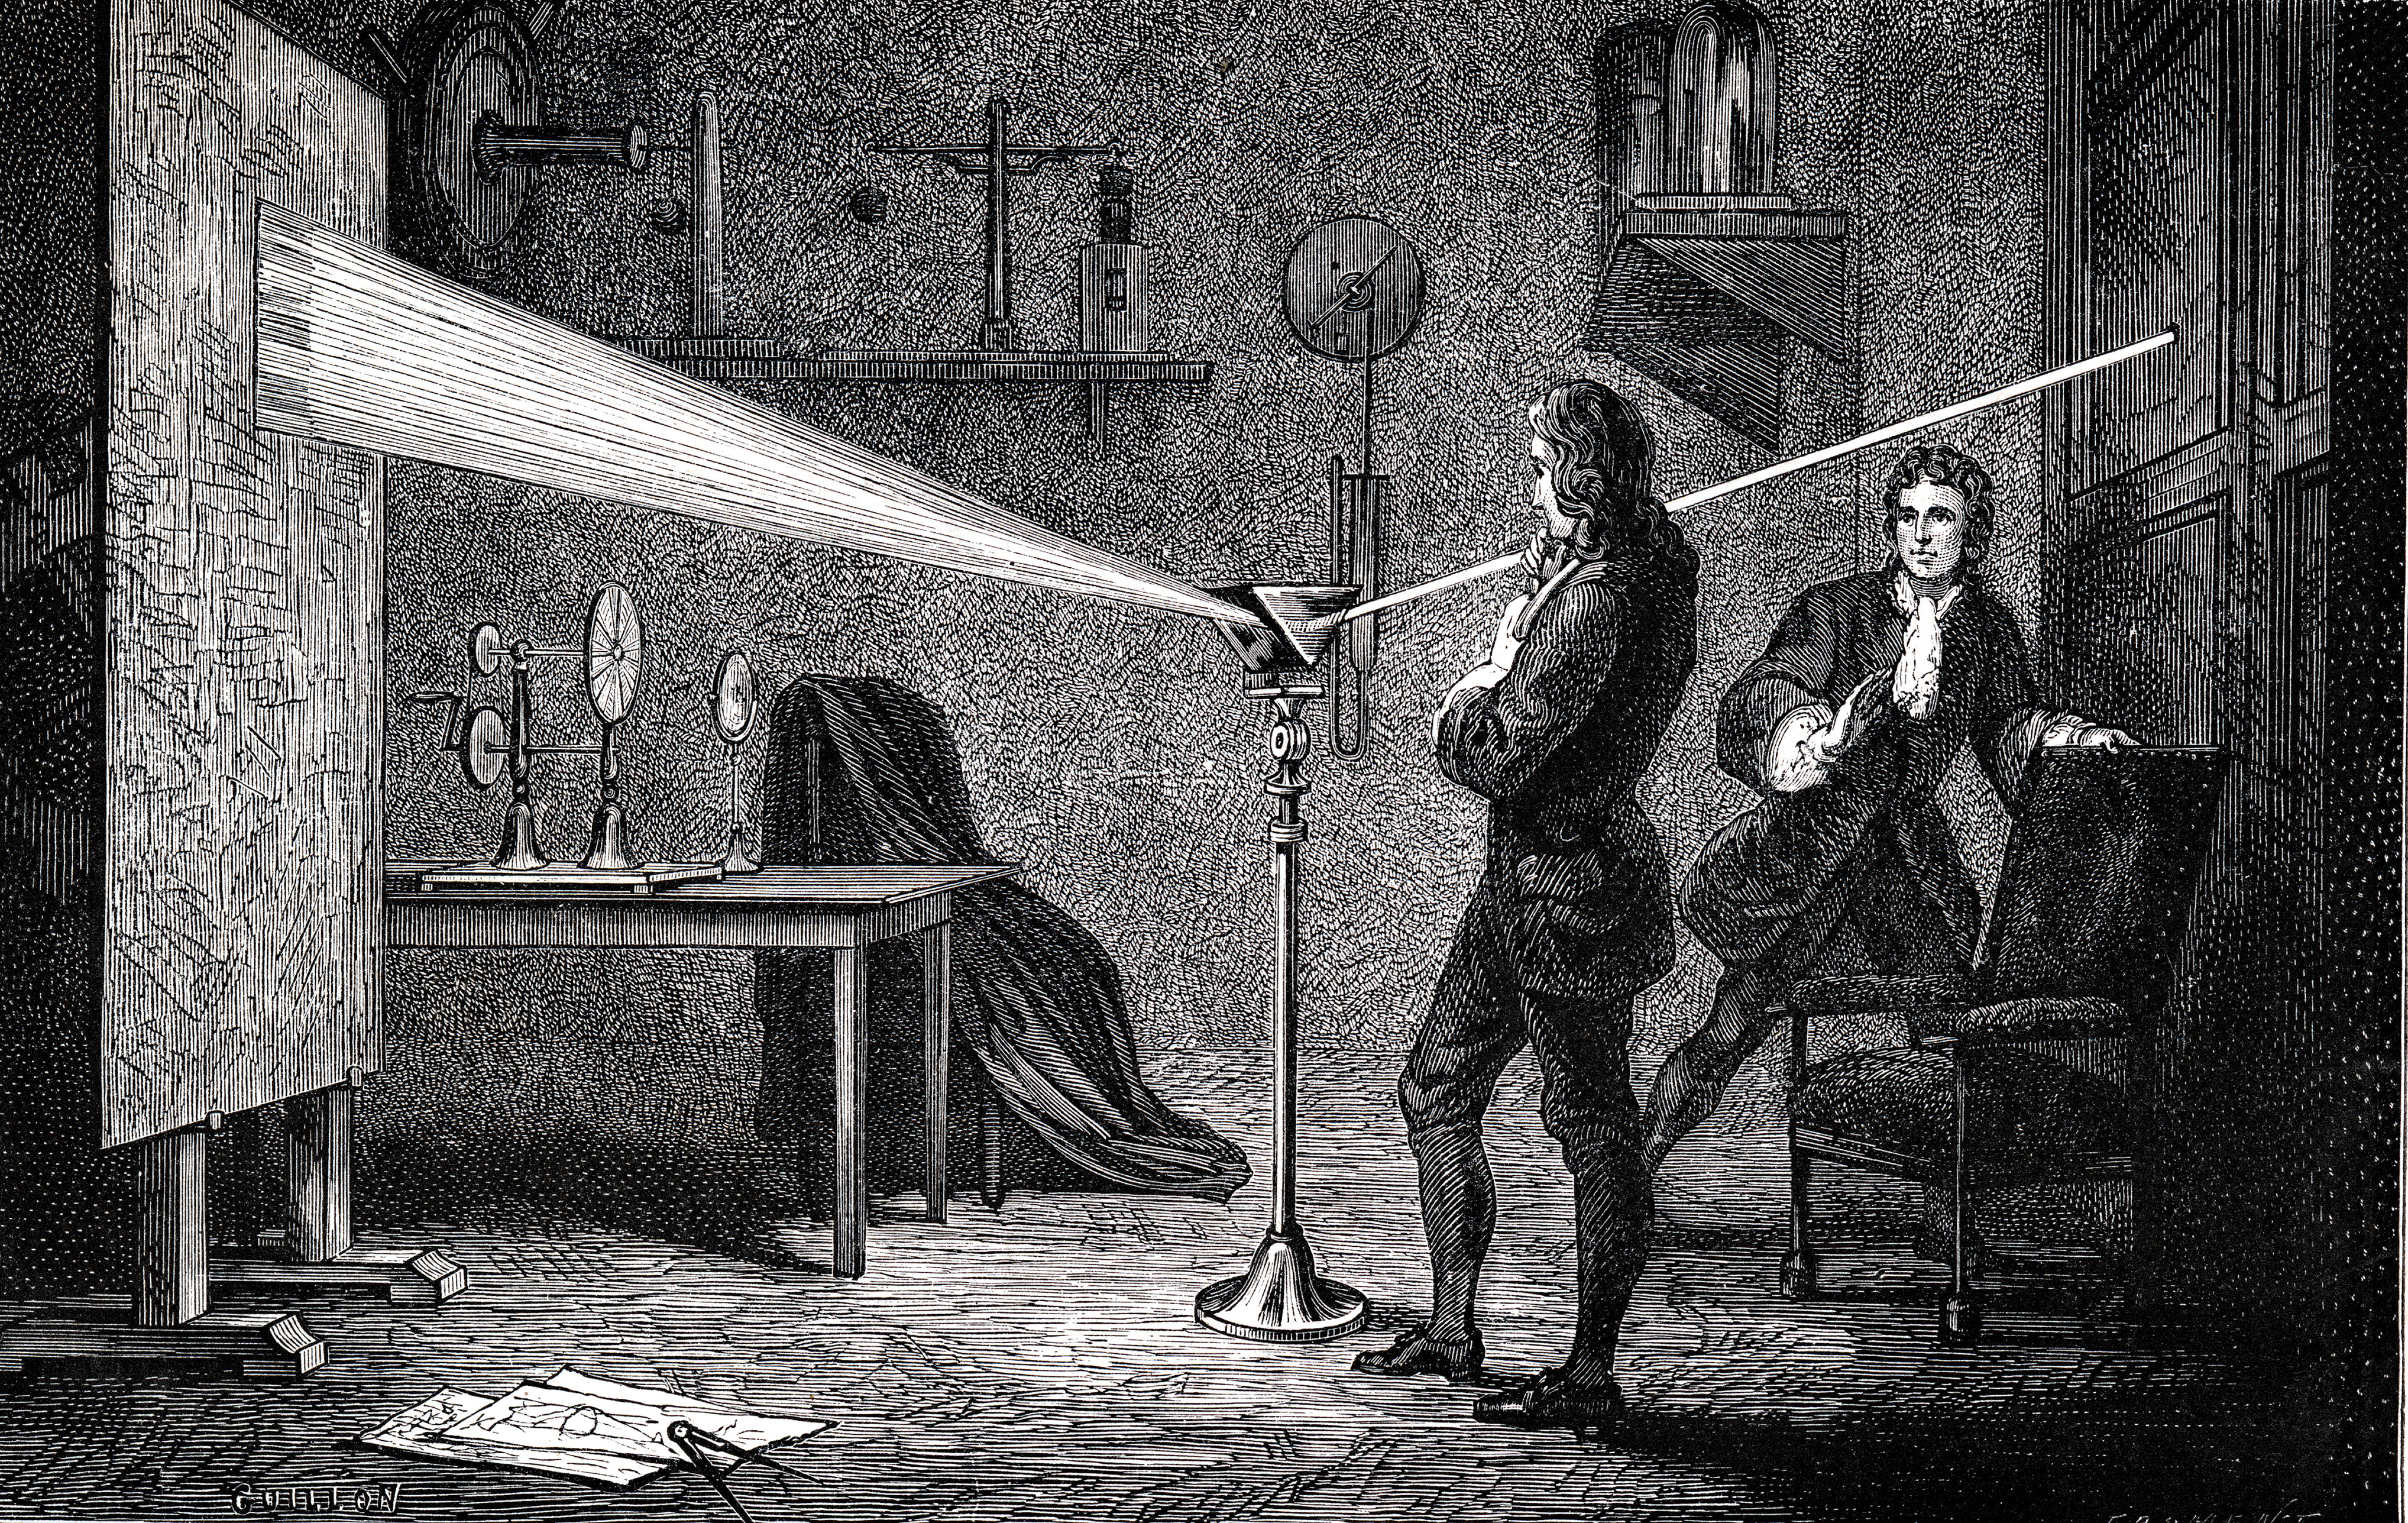 Optics contains details of Newton's famous experiments using prisms to investigate the composition of light.